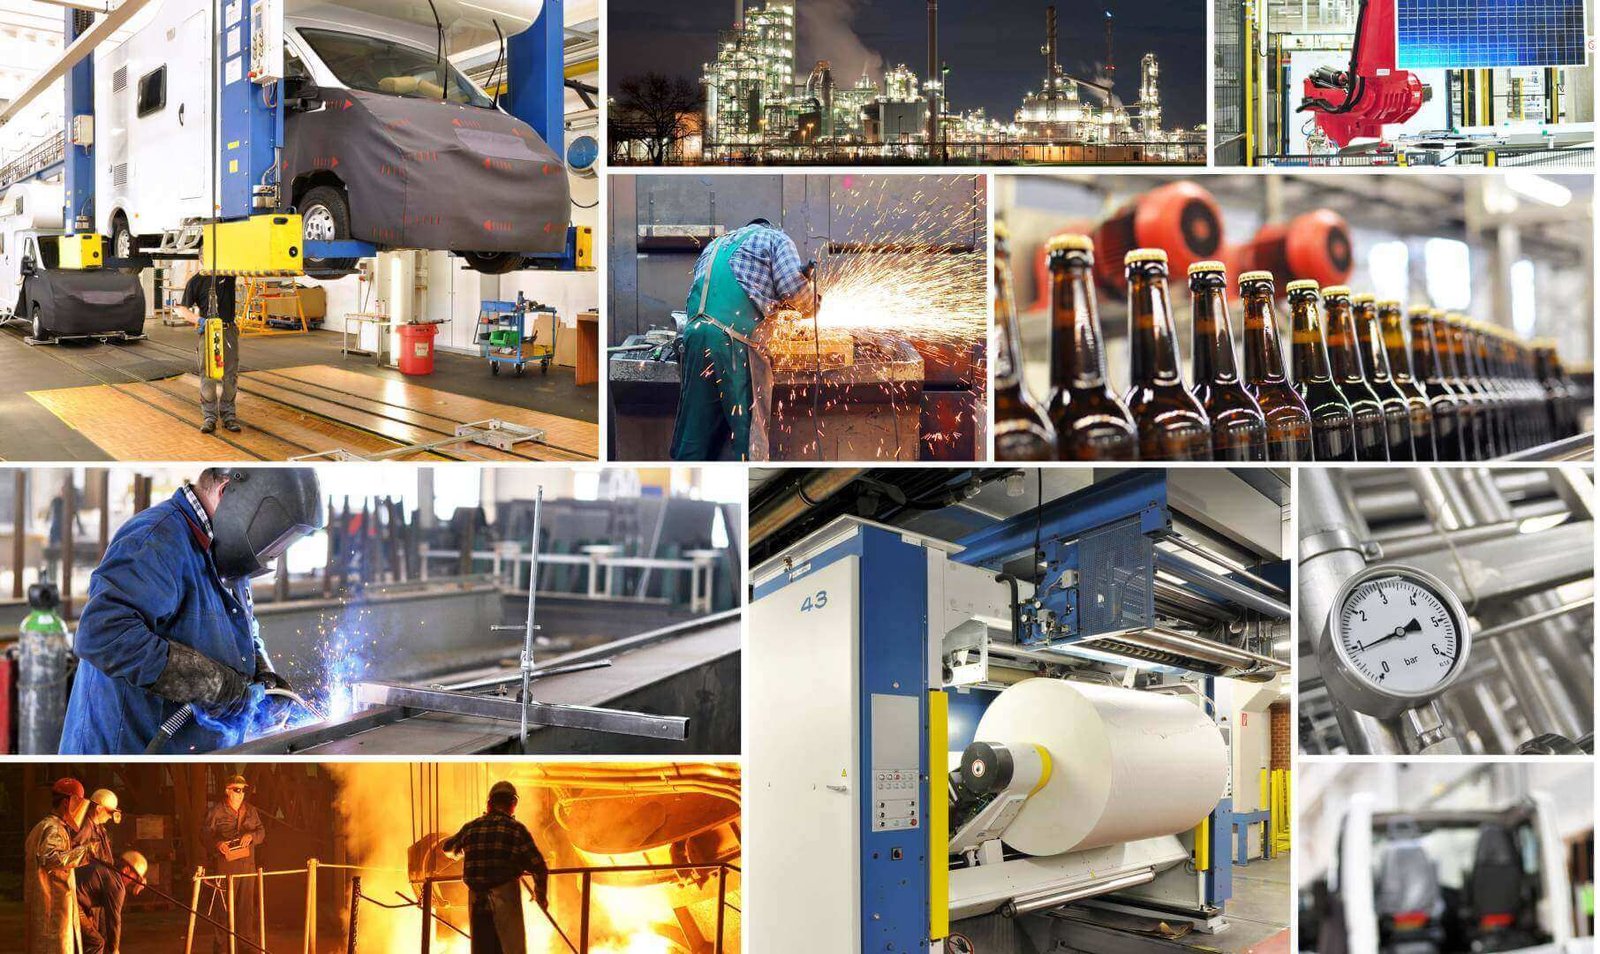 Discover the top manufacturing companies in the UK and learn about their contributions to the industry and the economy